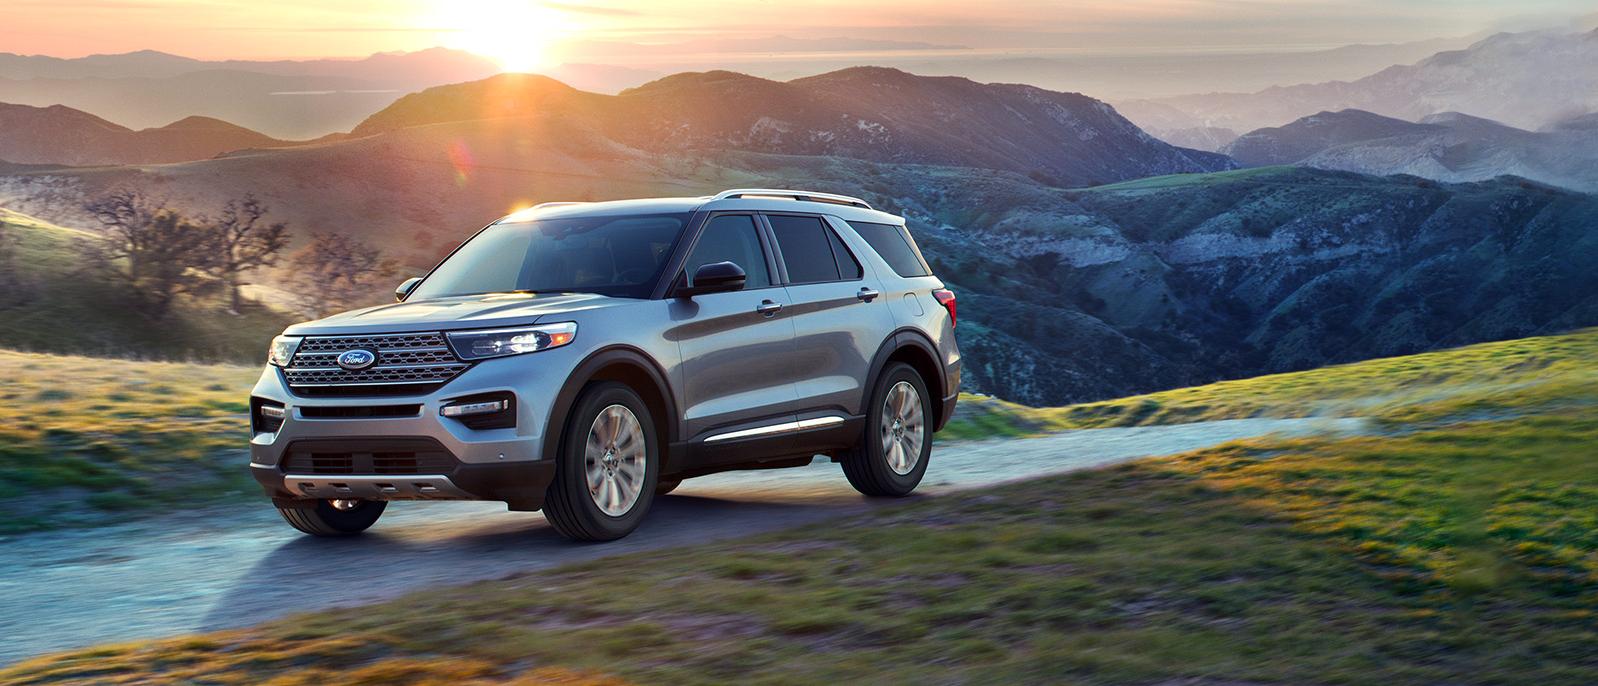 2020 Ford Explorer driving on a mountain road